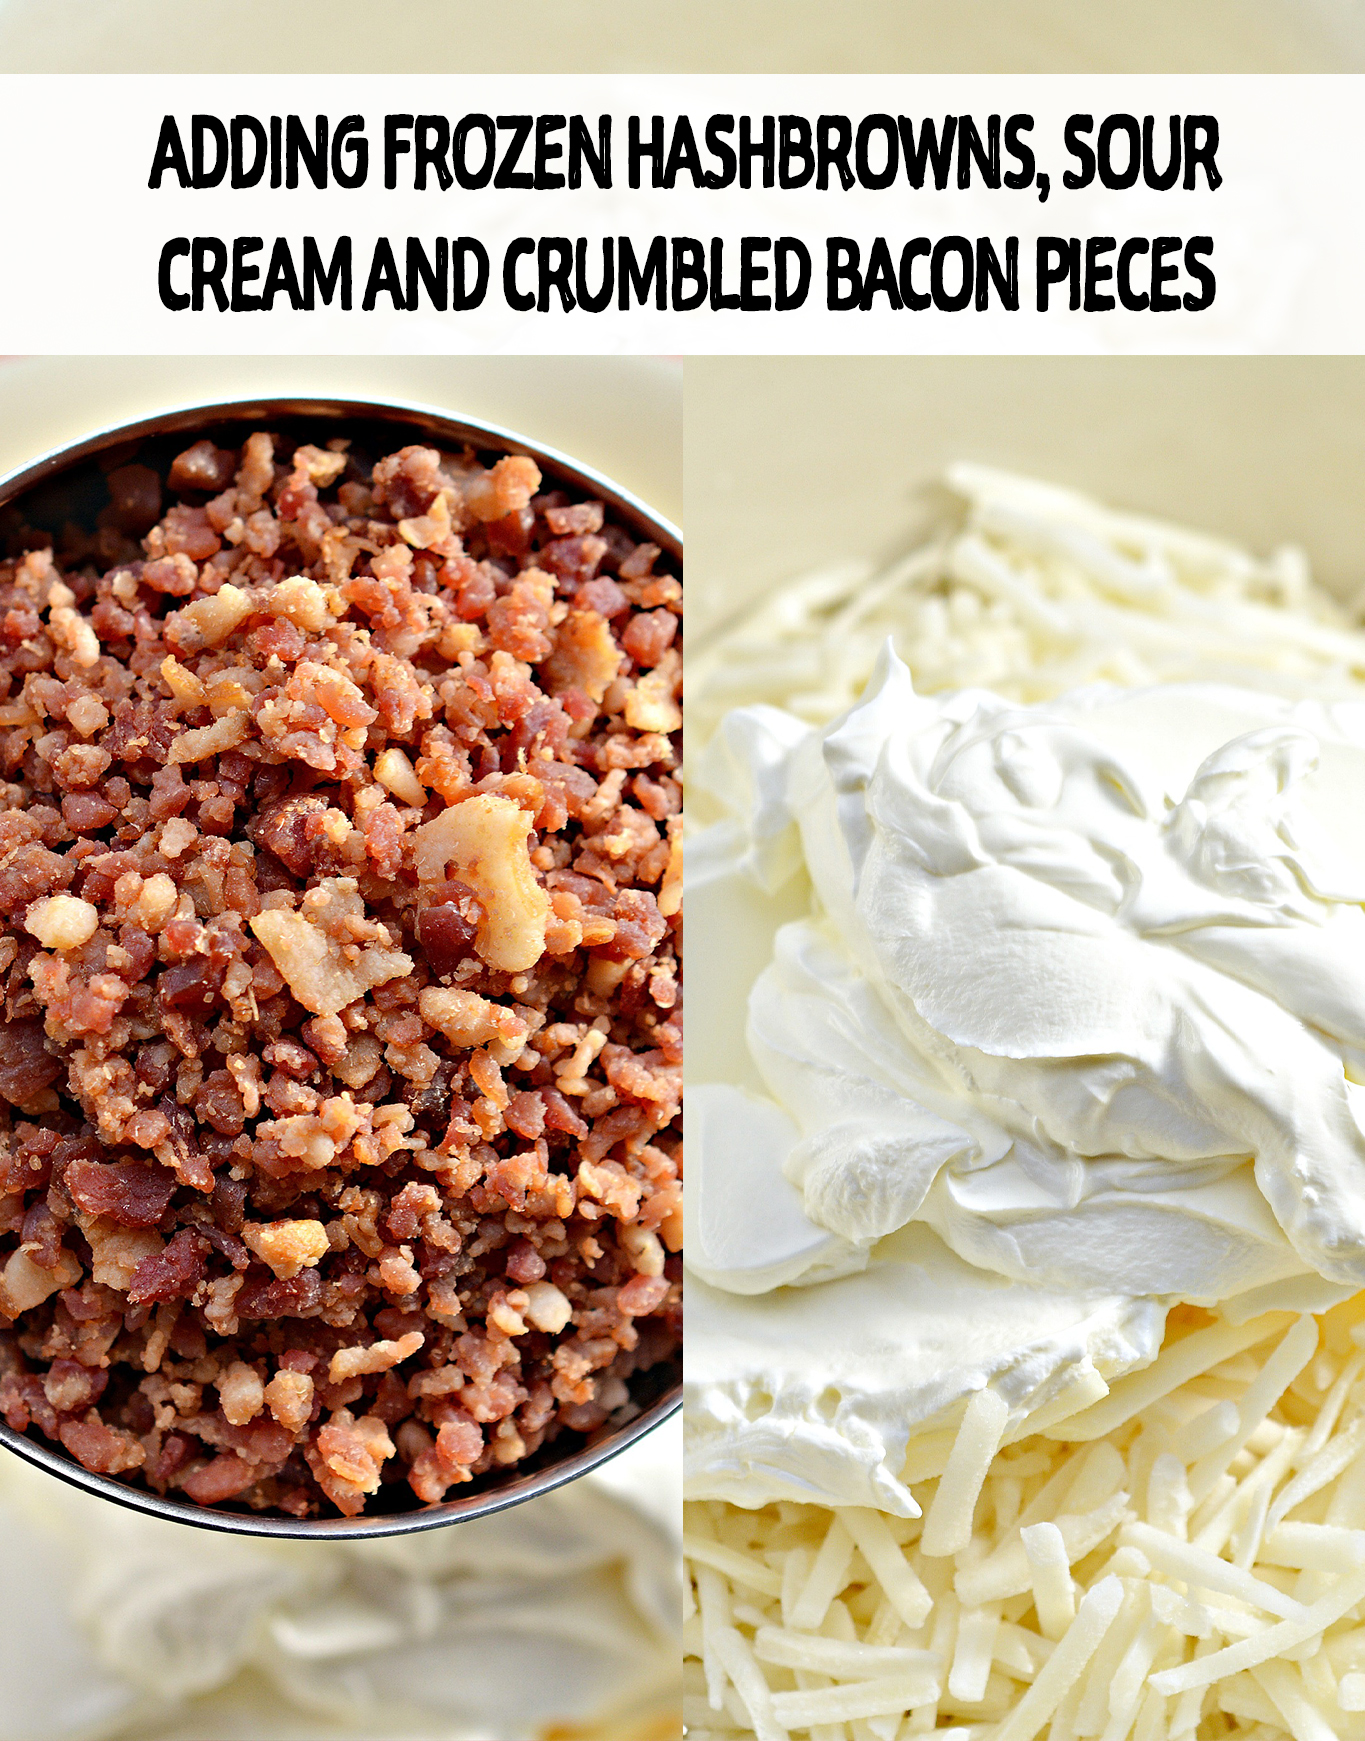 Adding  frozen hashbrowns, sour cream and crumbled bacon pieces for crack potatoes recipe